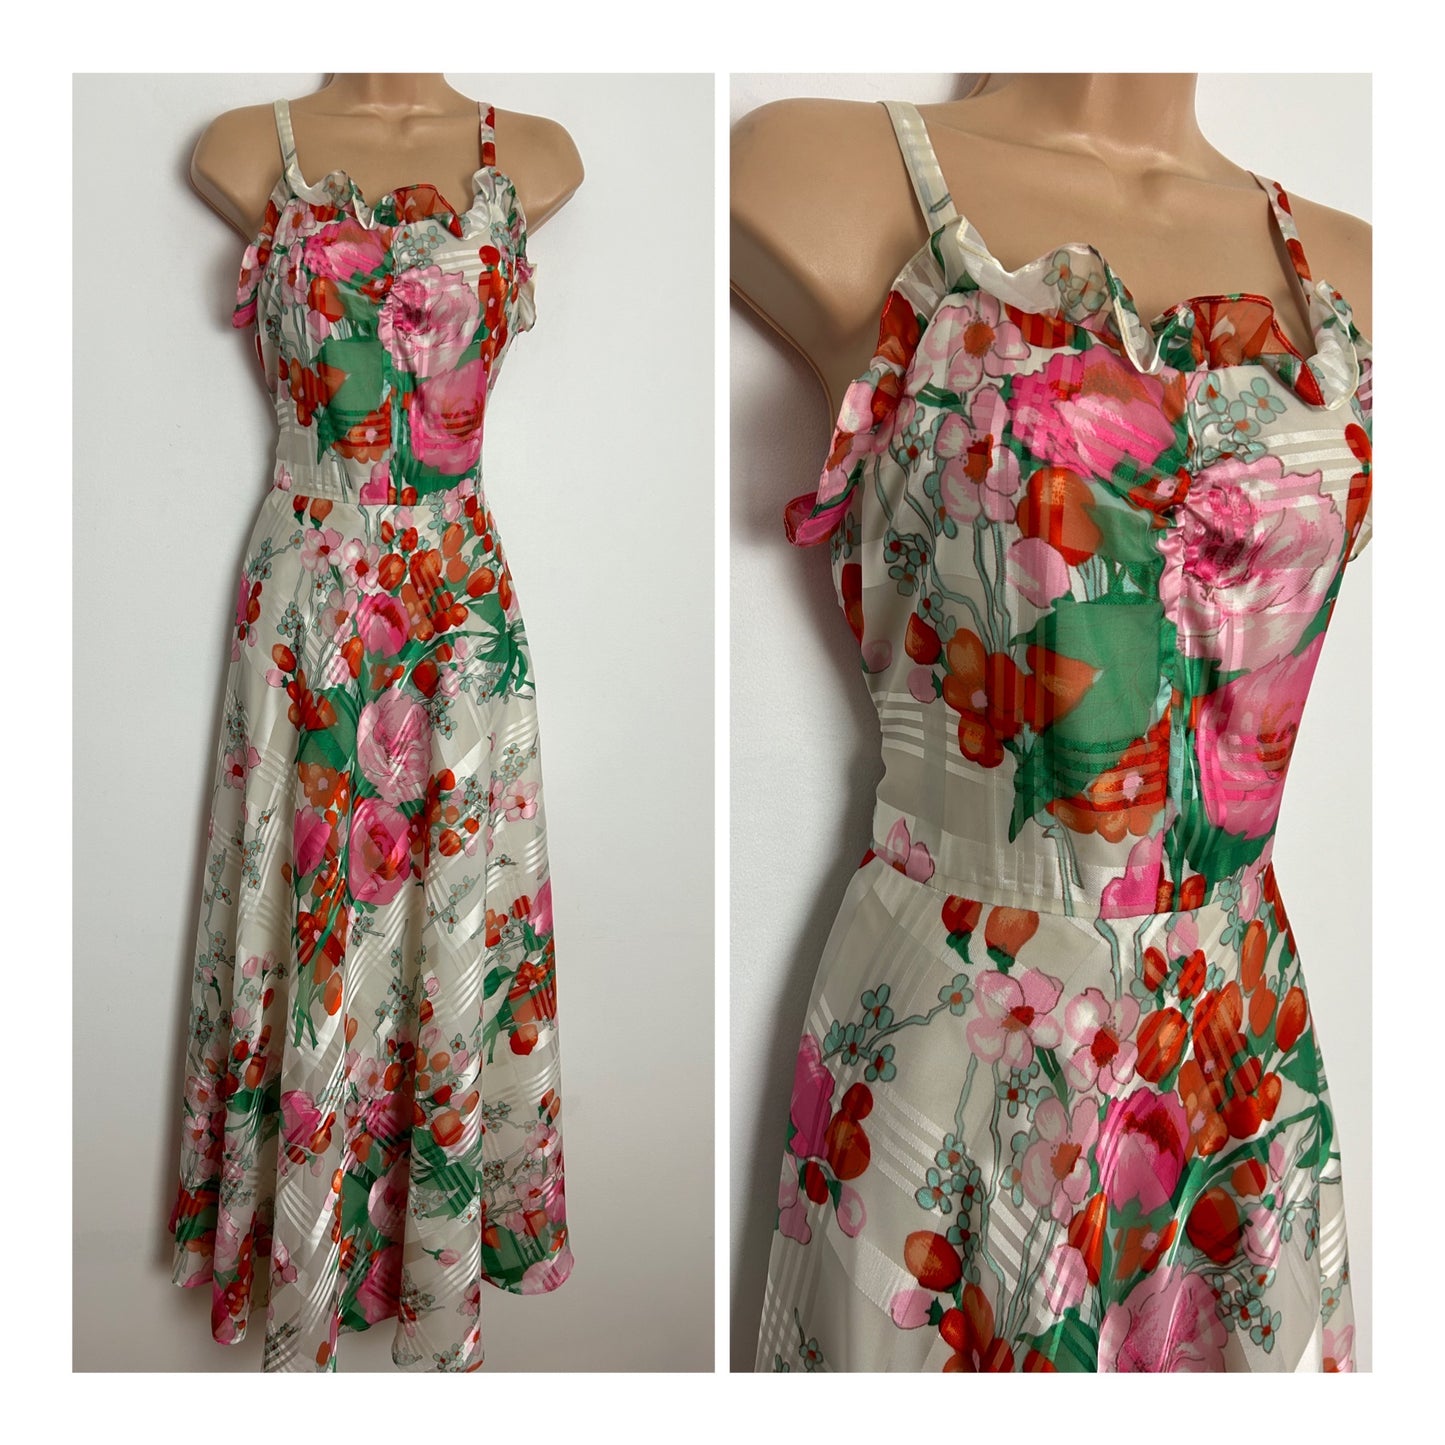 Vintage 1970's UK Size 8 Pretty Ivory White Pink Red & Green Floral Print Summer Boho Maxi Dress